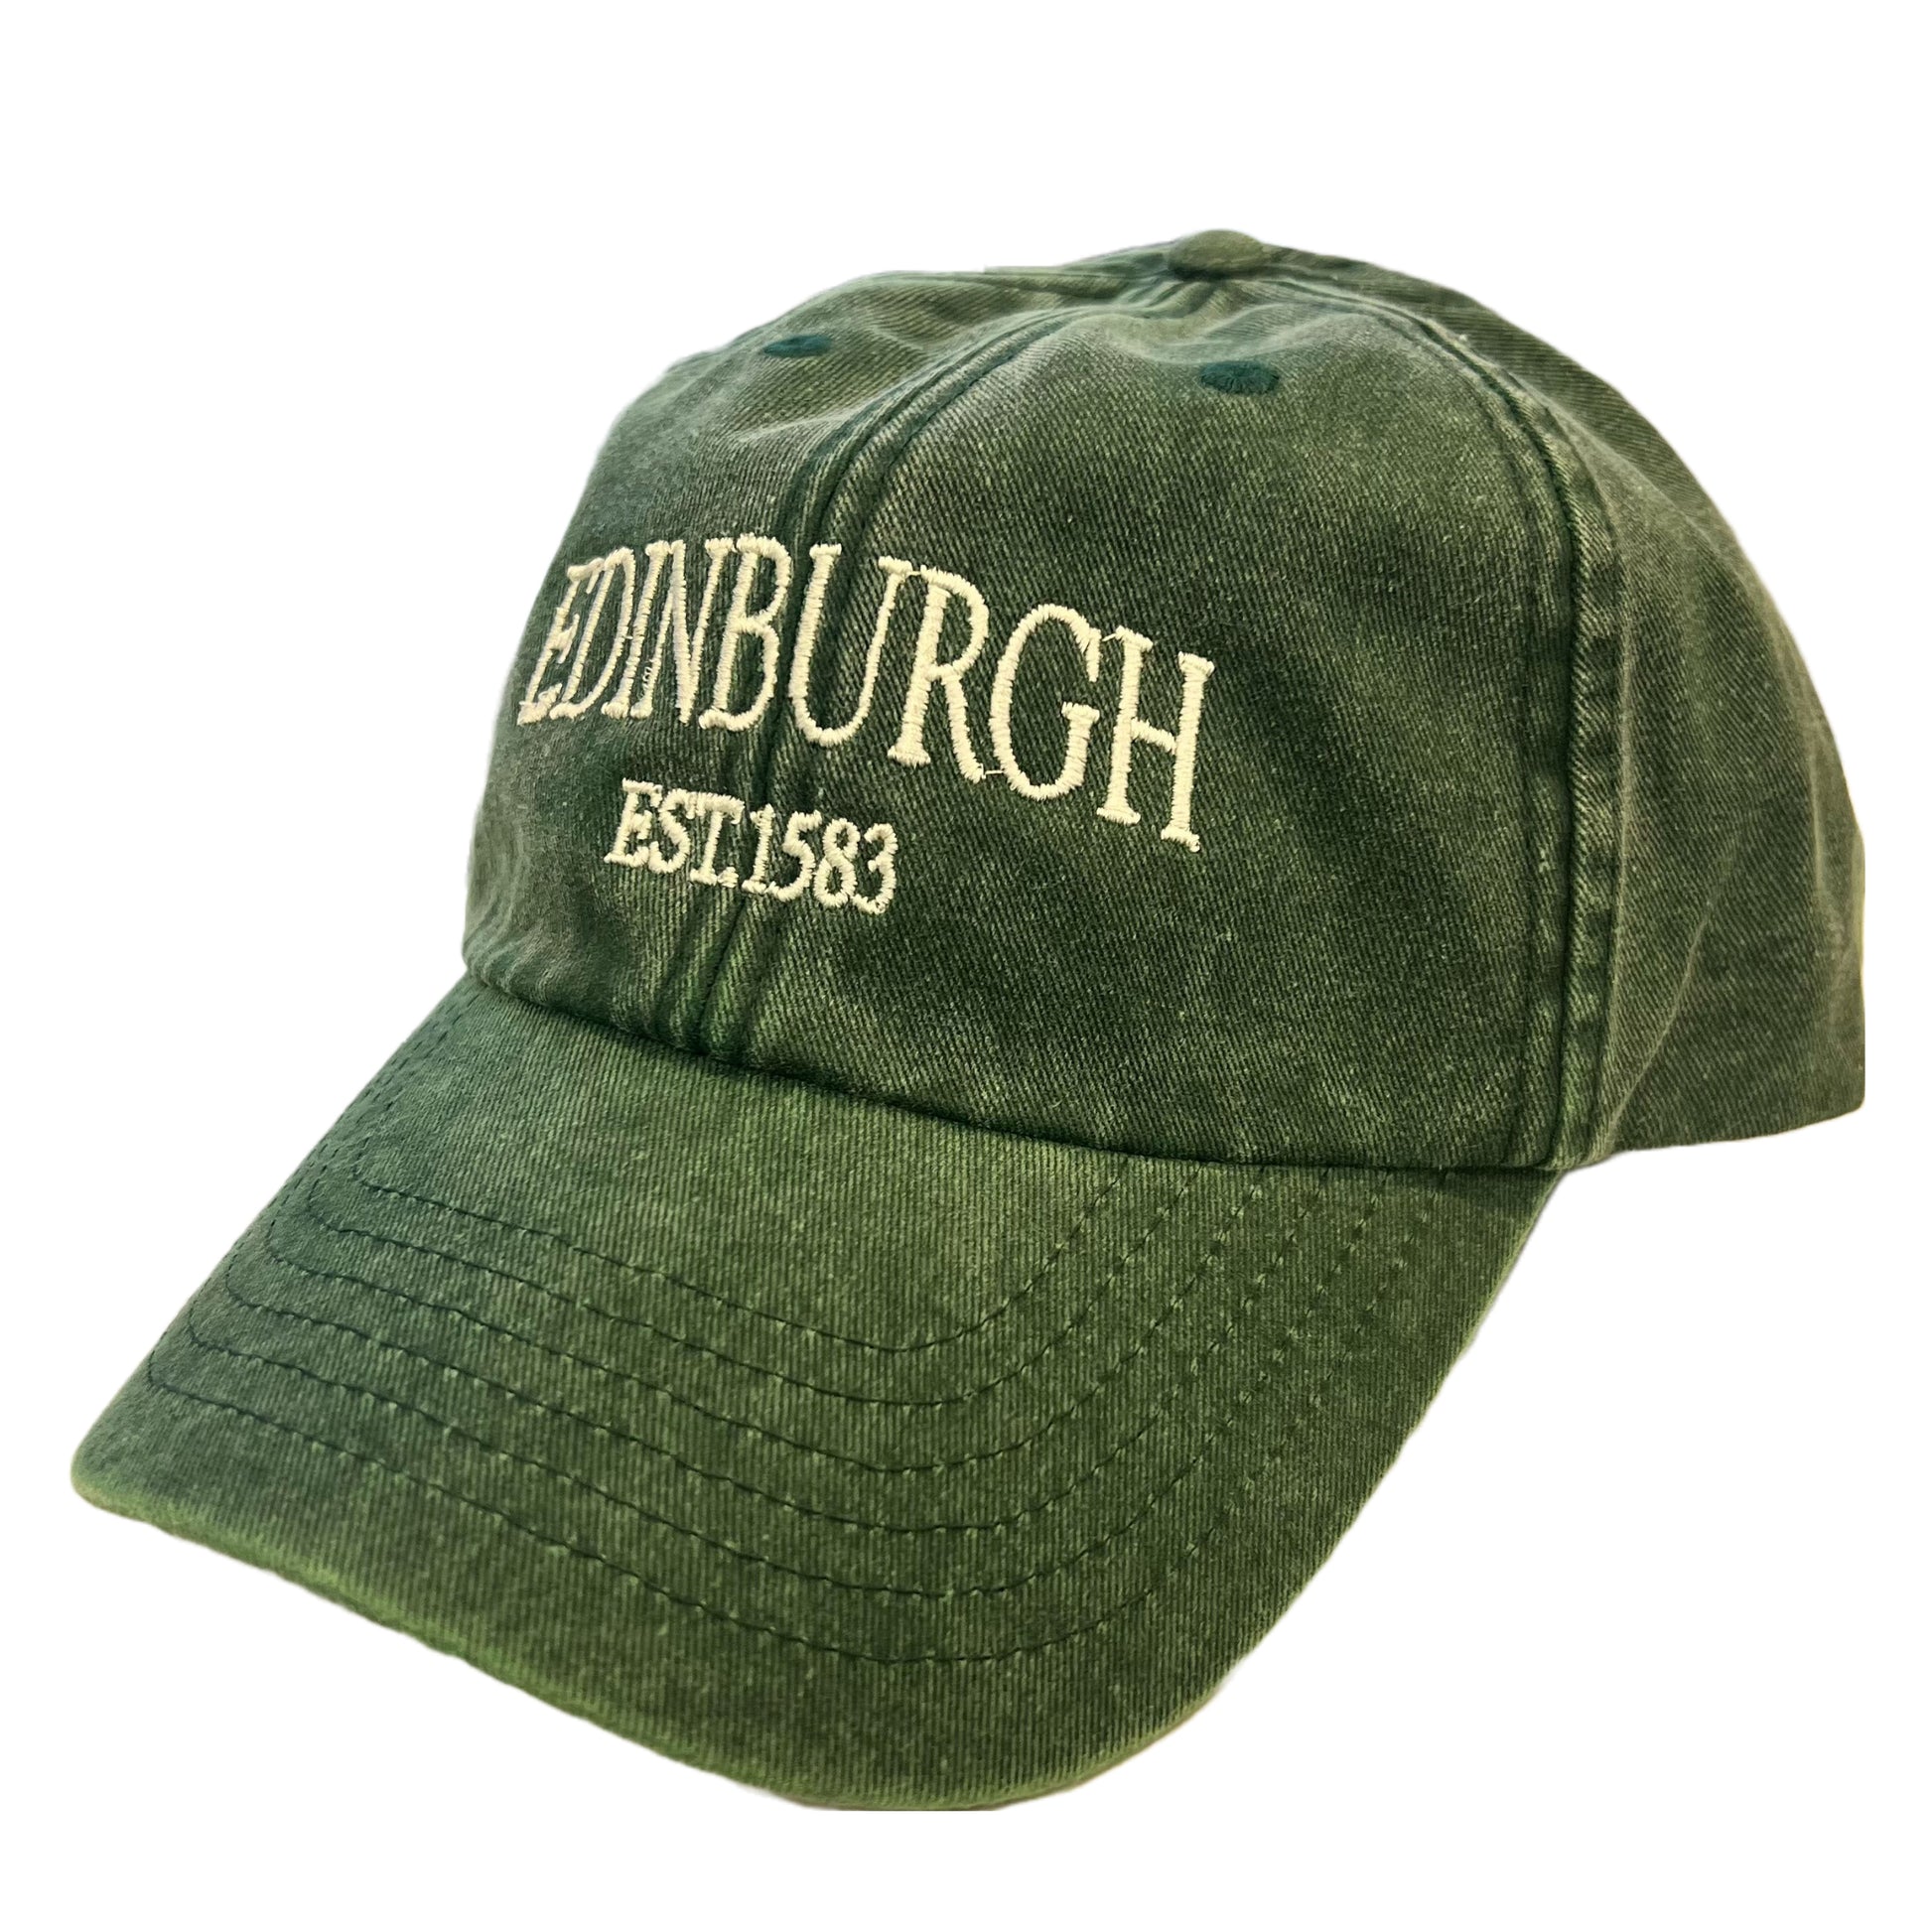 Green baseball cap with 'EDINBURGH EST. 1583' embroidered in white on the front